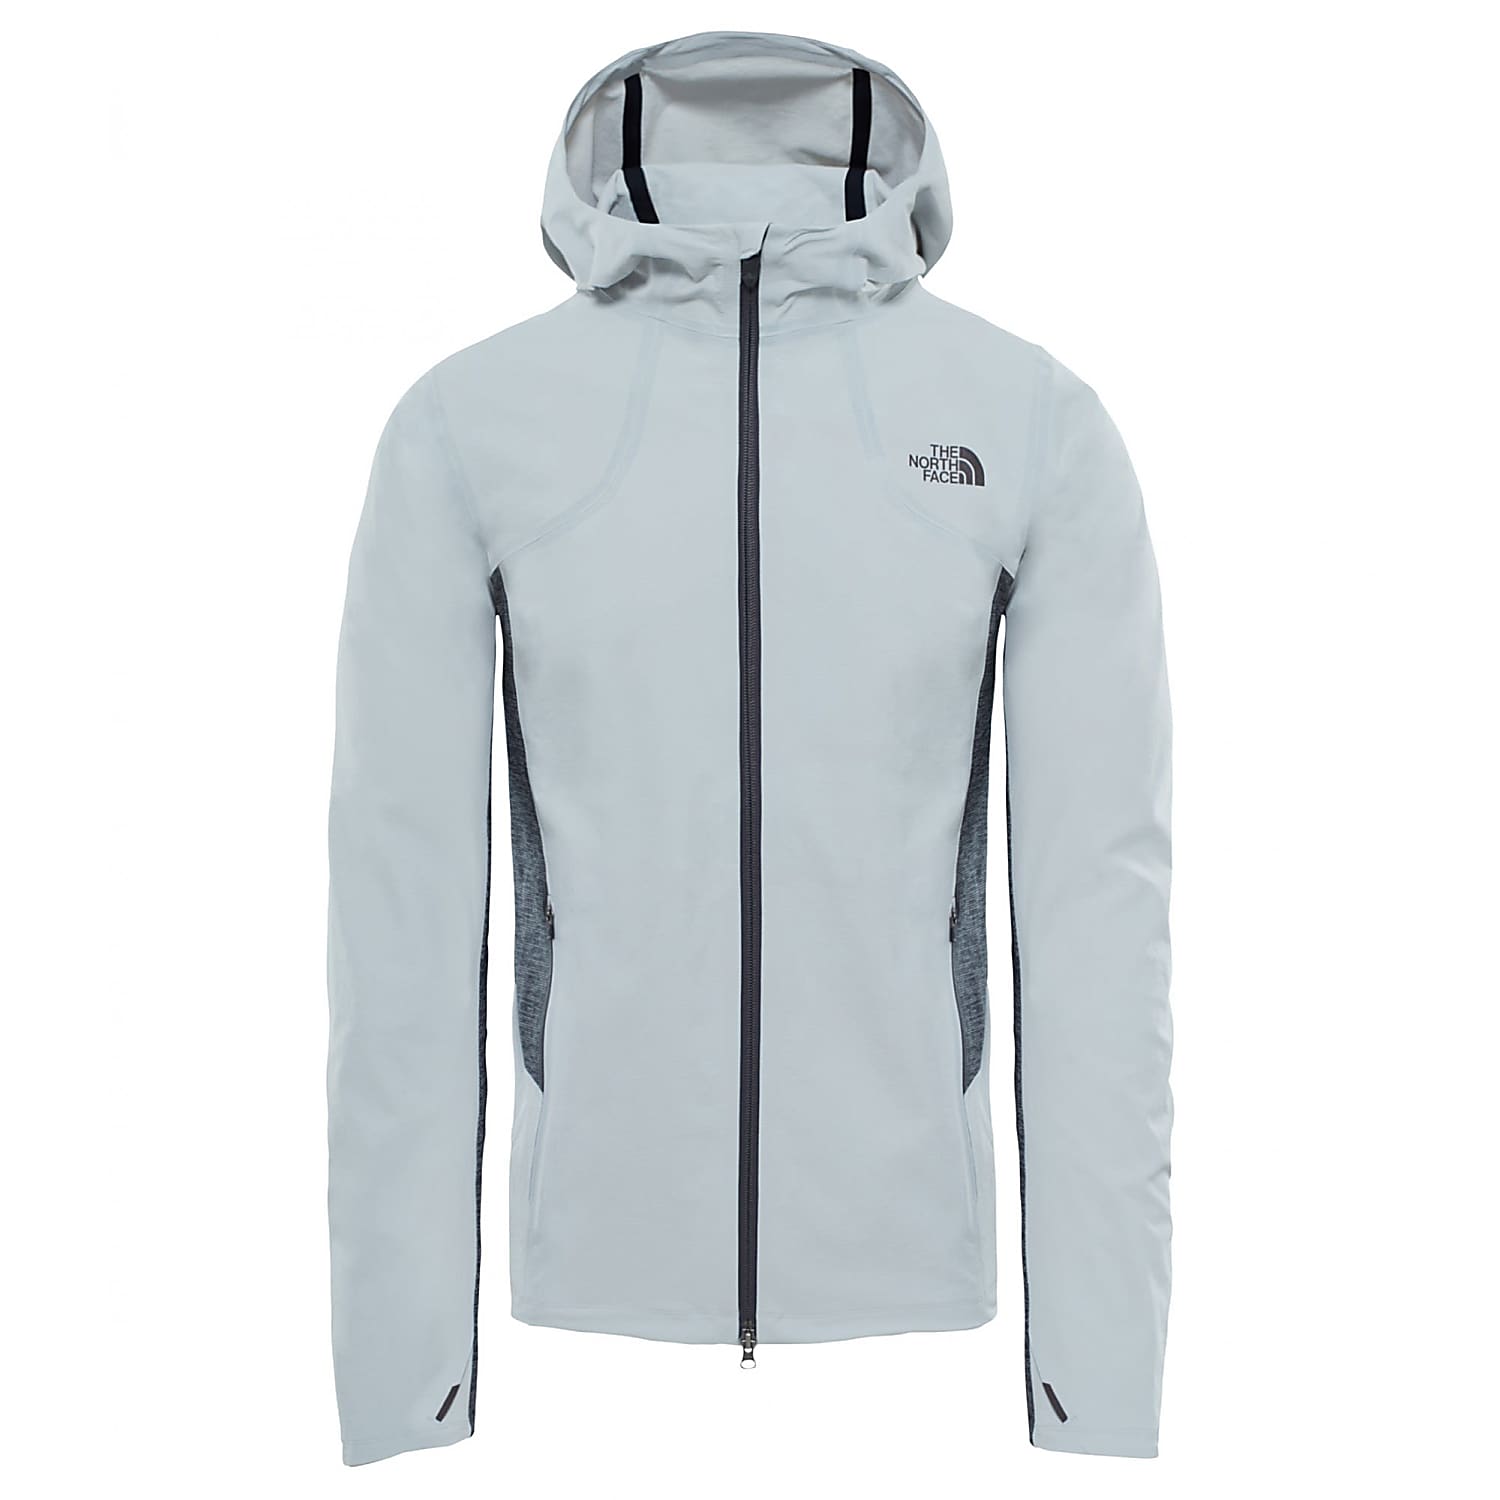 The North Face M BEYOND THE WALL JACKET 